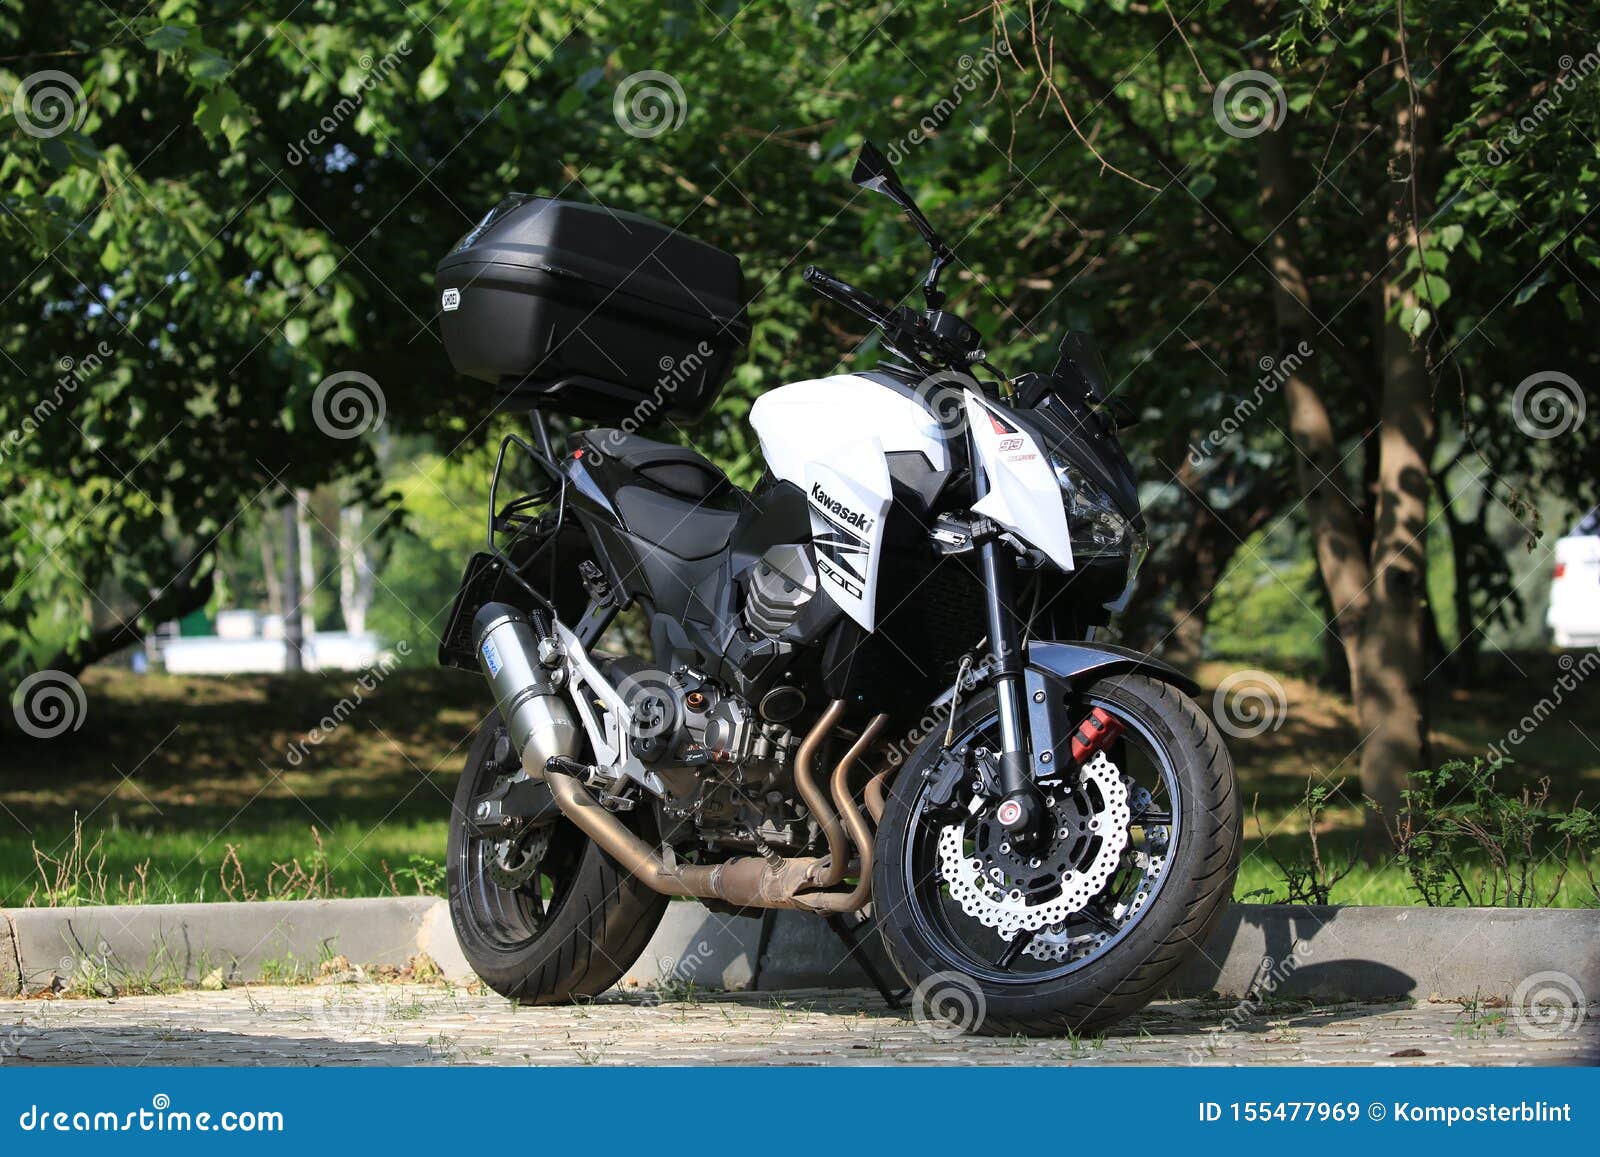 Kawasaki Z800 Motorcycle with Rear Case on a Sunny Day, on the Background of Green Bushes Editorial Stock - Image of region: 155477969